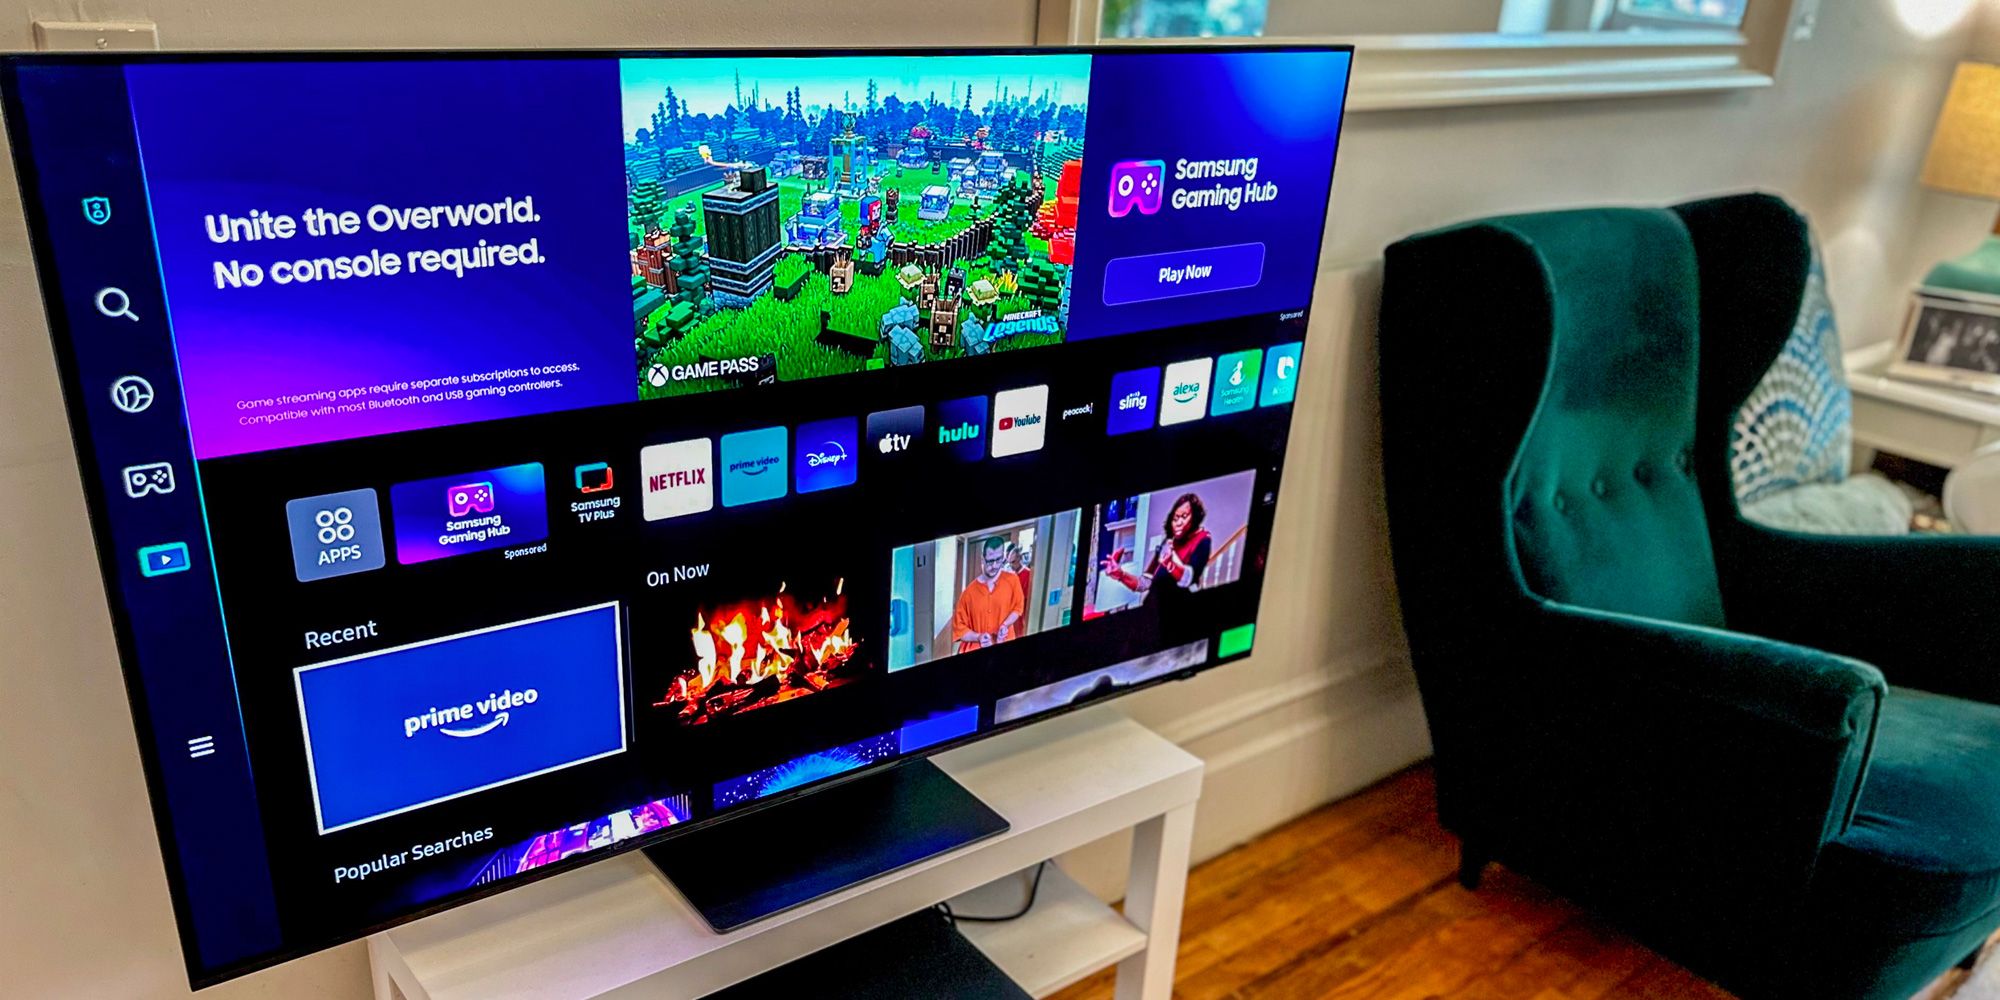 <p>Samsung's TV lineup has something for everyone, with sizes to suit any room, special features for all kinds of viewers, and a range of price points to suit with any budget. Samsung’s <a href="https://www.popularmechanics.com/technology/gadgets/a27719487/oled-vs-qled/">QLED</a> TVs, famed for their vivid colors thanks to Quantum Dot technology, deliver screens that bring a splash of life to every frame, perfect for movie nights and gaming sessions.</p><p>For those in search of advanced viewing experiences, the 4K Neo QLED models are the go-to choice. These TVs use Mini-LED backlighting for deeper contrasts and more immersive picture quality. The 8K Neo QLED models might be right for you if ultimate resolution and performance are your top priorities. These TVs offer unparalleled clarity and detail transforming your living room into a personal cinema.</p><p><a href="https://www.popularmechanics.com/technology/a36062602/outdoor-tvs/">Outdoor enthusiasts have options</a>, too, thanks to Samsung's Terrace series. Designed with weather-resistant features and enhanced brightness, these TVs bring high-quality visuals to your <a href="https://www.popularmechanics.com/home/lawn-garden/a43576254/popular-mechanics-yard-and-garden-awards-2023/">backyard, patio or deck</a> so you never miss a moment of your favorite show or sports game, even in the sun.</p><h2 class="body-h2">Best Samsung TVs</h2><ul><li><strong>Best Overall: </strong><a href="https://www.amazon.com/SAMSUNG-Tracking-Symphony-Xcelerator-QN55S95C/dp/B0BWFSFD7P?th=1&tag=syndication-20&ascsubtag=%5Bartid%7C10060.g.37872411%5Bsrc%7Cmsn-us">Samsung S95C</a></li><li><strong>Best Budget: </strong><a href="https://www.amazon.com/SAMSUNG-PurColor-Q-Symphony-Xcelerator-UN65CU8000/dp/B0BVMY9NCN/ref=sr_1_1?qid=1700056305&refinements=p_n_feature_nine_browse-bin%3A23732468011%2Cp_89%3ASAMSUNG&rnid=2528832011&s=tv&sr=1-1&ufe=app_do%3Aamzn1.fos.18630bbb-fcbb-42f8-9767-857e17e03685&th=1&tag=syndication-20&ascsubtag=%5Bartid%7C10060.g.37872411%5Bsrc%7Cmsn-us">Samsung CU8000</a></li><li><strong>Best Outdoor TV: </strong><a href="https://www.amazon.com/SAMSUNG-85-Inch-Terrace-Anti-Reflection-QN85LST9C/dp/B0CDJHH46Z/ref=sr_1_1?qid=1700069120&refinements=p_n_feature_nine_browse-bin%3A23732468011%2Cp_89%3ASAMSUNG%2Cp_85%3A2470955011&rnid=2470954011&rps=1&s=tv&sr=1-1&ufe=app_do%3Aamzn1.fos.ac578592-0362-4e0a-958c-0f2dd61d30d4&tag=syndication-20&ascsubtag=%5Bartid%7C10060.g.37872411%5Bsrc%7Cmsn-us">Samsung The Terrace LST9C</a></li><li><strong>Best Design: </strong><a href="https://www.amazon.com/SAMSUNG-43-Inch-Anti-Reflection-Included-QN43LS03BAFXZA/dp/B09TQ5CC4P/ref=sr_1_2?crid=2E1WZLGTD6XA8&keywords=samsung%2Btv&qid=1700082666&refinements=p_72%3A1248879011%2Cp_85%3A2470955011%2Cp_n_feature_nine_browse-bin%3A23732472011%2Cp_n_size_browse-bin%3A3578041011&rnid=1232878011&rps=1&s=tv&sprefix=samsung%2Btv%2Caps%2C99&sr=1-2&ufe=app_do%3Aamzn1.fos.ac578592-0362-4e0a-958c-0f2dd61d30d4&th=1&tag=syndication-20&ascsubtag=%5Bartid%7C10060.g.37872411%5Bsrc%7Cmsn-us">Samsung The Frame LSO3B</a></li><li><strong>Best for Binge-Watchers: </strong><a href="https://go.redirectingat.com?id=74968X1553576&url=https%3A%2F%2Fwww.bestbuy.com%2Fsite%2Fsamsung-75-class-tu690t-crystal-uhd-4k-smart-tizen-tv%2F6514052.p%3FskuId%3D6514052&sref=https%3A%2F%2Fwww.popularmechanics.com%2Ftechnology%2Fgadgets%2Fg37872411%2Fbest-samsung-tv%2F">Samsung TU690T</a></li></ul><blockquote class="body-blockquote"><strong>The Expert:</strong> I'm a tech journalist who reviews gadgets like laptops, tablets, and TVs. My work has been published in major outlets like <em>The Atlantic</em> and <em>The Los Angeles Times</em>.</blockquote><h2 class="body-h2">What To Look for in a Samsung TV</h2><p>Television technology continues to evolve offering a diverse range of options for viewers. At the more budget-friendly end are LCD and LED panels, which are known for their brightness and durability. LCD displays rely on fluorescent backlights, while LEDs use light-emitting diodes, typically delivering better picture quality. However, LCD and LED screens often suffer from limited viewing angles and less effective light control within the image.</p><p>Stepping up in quality, Quantum Dot or QLED technology offers a significant enhancement. These TVs employ minuscule particles, each a different size, to emit a unique color, leading to a much broader and more vivid color range than traditional LCD panels.</p><p>Organic Light-Emitting Display technology, or OLED for short, represents another leap forward using organic phosphors where each pixel produces its own light. This process results in exceptional precision in lighting and contrast, outshining LCD TVs. OLED screens also maintain their clarity and color integrity at wider viewing angles. The downside is their higher price tag and lower brightness level compared to LCDs.</p><p>The latest innovation in TV technology is Mini-LED. This approach minimizes the LED modules used in backlighting LCD screens, achieving deeper blacks and enhancing overall picture quality. However, like OLED, Mini-LED technology comes with a higher cost.</p><p>Each technology has its strengths and weaknesses, catering to different preferences and budgets. Whether it's the cost-effectiveness and brightness of LCDs, the color richness of QLEDs, the contrast and viewing angles of OLEDs, or the deep blacks of Mini-LEDs, TV technology is available to suit various viewing needs.</p><h3 class="body-h3"><strong>Specs to Consider</strong></h3><h4 class="body-h4"><strong>Screen Size</strong></h4><p>You should pick the size of your TV based on the size of the room where you plan to set it up, and how far away you'll sit from the screen. If you have a large family room or basement, a 65- or 75-inch TV will offer a near-cinema experience. If you have a small apartment or plan to use your new TV in your bedroom, a 32- or 40-inch screen will suffice. Most people have the space to accommodate a <a href="https://www.popularmechanics.com/technology/gear/g37214595/best-55-inch-tvs/">55-inch screen</a>, which is the average ideal size.</p><h4 class="body-h4"><strong>Resolution</strong></h4><p>One of the most important specifications to consider in a TV is its resolution, which is the number of pixels that make up the picture on a display. The more pixels, the sharper the image. While Samsung still sells some 1080p "Full HD" TVs, but <a href="https://www.popularmechanics.com/technology/g37203677/best-4k-tvs/?gclid=CjwKCAjwkvWKBhB4EiwA-GHjFkrVFn1h0tC6pakX1dNRT1jPHDYxk0ZM9_XONxkX8vW6JGV3M_eYCRoC8uYQAvD_BwE">4K TVs</a> are the modern standard. Samsung also makes 8K TVs, which feature double the number of pixels of 4K resolution. However, 8K TVs are prohibitively expensive, and there is no readily available pipeline of 8K movies, TV or video games. Given that, we recommend steering clear of 8K for now.</p><p class="body-tip">More of Our Favorite TVs: <a href="https://www.popularmechanics.com/technology/gadgets/g25620058/smart-tvs/">Best Smart TVs</a>, <a href="https://www.popularmechanics.com/technology/gadgets/g37711867/best-lg-tvs/">Best LG TVs</a>, <a href="https://www.popularmechanics.com/technology/gadgets/g37621908/best-sony-tvs/">Best Sony TVs</a></p><h4 class="body-h4"><strong>Display Technology</strong></h4><p>TVs that use LCD or LED panels of liquid crystal pixels are bright and durable and generally cost the least. An LCD display uses fluorescent backlights, while an LED screen uses light-emitting diodes for backlights. LED displays usually have superior picture quality. But LCD and LED panels often have limited viewing angles and don’t control light in the picture as well as other technologies.</p><p>Higher-quality TVs use quantum dots, sometimes also called QLED, that provide more comprehensive color ranges than you can get with most LCD panels. The technology uses tiny particles in different sizes that allow each size to emit a different color.</p><p><a href="https://www.popularmechanics.com/technology/g37773947/best-oled-tvs/">OLED TVs</a> use organic phosphors. Each pixel can generate its own light, which makes for better light precision and contrast compared to LCD TVs. OLED TVs can be seen from wider viewing angles than LCD TVs without reducing contrast or losing color. But OLED TVs can be quite pricey and aren’t as bright as LCD TVs. The relatively new and expensive Mini-LED technology shrinks the LED modules that provide backlighting to LCD screens, resulting in deeper black.</p><h3 class="body-h3">Audio</h3><p>Choosing a TV with a built-in audio system requires considering several factors to ensure you get the best experience for your needs. First, assess the sound quality. Look for TVs with high-fidelity speakers that offer clear and balanced sound. Brands often mention audio specifications like wattage and sound technologies like Dolby Atmos or DTS:X, which indicate superior sound quality.</p><p>Room size plays a crucial role. For larger rooms, opt for TVs with more powerful speakers to ensure the sound fills the space. Conversely, a TV with less powerful speakers in smaller rooms might be just fine. Pay attention to the audio output ratings, usually measured in watts, to gauge the system’s power.</p><p>Another aspect is the sound features offered. Some TVs have built-in sound bars that provide a richer, more immersive audio experience. Bass enhancement, voice clarity, and virtual surround sound can significantly improve your viewing experience, especially for movies and games.</p><p>Connectivity options are also important. If you upgrade to a separate sound system, ensure the TV has options for external audio connections like HDMI ARC or optical out.</p><p>Finally, consider the type of content you usually consume. If you watch a lot of dialogue-heavy content, look for TVs with clear voice enhancement features. For action movies or gaming, a TV with good bass response and immersive sound technology will enhance your experience.</p><p>By focusing on these factors, you can choose a TV with a built-in audio system that complements the visual experience and immerses you in high-quality sound.</p><h3 class="body-h3">Connectivity</h3><p>When selecting a TV, connectivity can significantly enhance your viewing experience. Consider the types and number of ports available. HDMI ports are essential; they connect gaming consoles, sound systems, streaming devices, and Blu-ray players. The more HDMI ports a TV has, the more devices you can connect without needing to swap cables.</p><p>USB ports are also important. They allow you to plug in external hard drives or USB sticks to view your own media. A TV with multiple USB ports offers greater flexibility. Additionally, check for an Ethernet port for a stable wired internet connection which is beneficial for streaming high-definition content without lag.</p><p>Smart connectivity features like Wi-Fi and Bluetooth are now standard in most modern TVs. Wi-Fi enables you to connect your TV to your home network for streaming while Bluetooth allows for wireless connection to sound bars, headphones, or other Bluetooth-enabled devices.</p><p>You may also want to look for compatibility with smart home ecosystems like Google Assistant, Amazon Alexa, or Apple HomeKit. This integration lets you control your TV using voice commands or through other smart devices.</p><p>Lastly, consider future-proofing. Look for newer versions of HDMI (like HDMI 2.1) for compatibility with the latest gaming consoles and other devices. You can create a seamless and enjoyable entertainment setup by ensuring your TV has robust and versatile connectivity options.</p><h2 class="body-h2">How We Evaluated These Samsung TVs</h2><p>To make my recommendations, I spent a lot of time looking closely at Samsung TVs, focusing on their size, resolution, cost, and quality. Besides studying their specs, I checked out these TVs in person to see how they stack up against others in the same price range.</p>